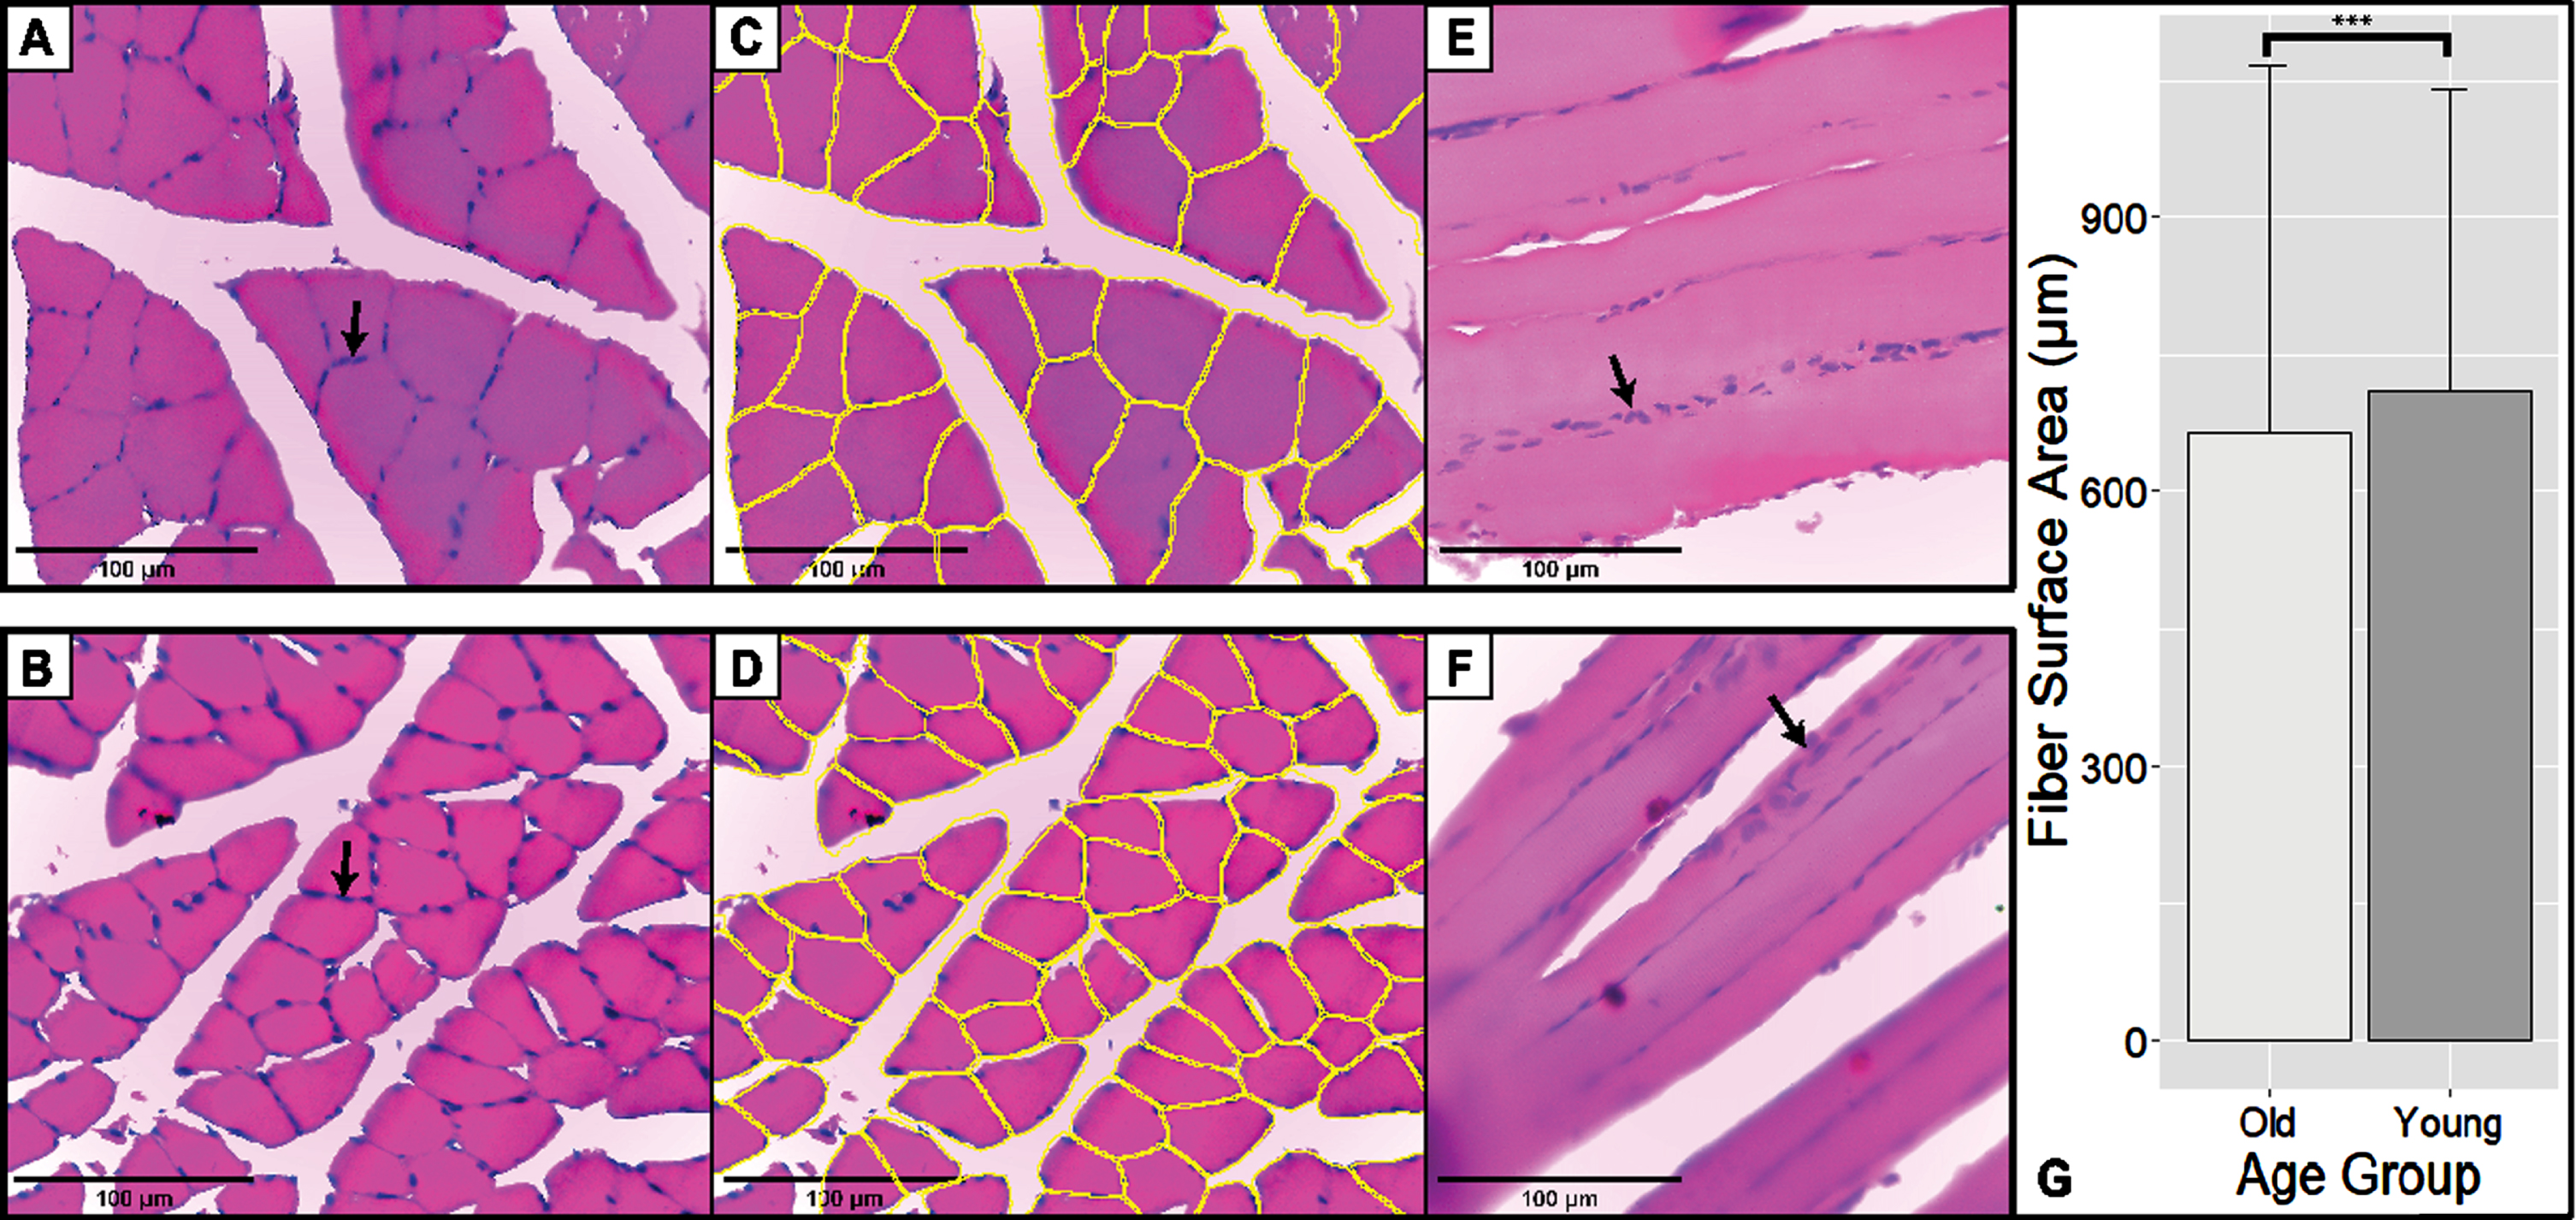 H&E Staining of Skeletal Muscle in Transverse and Longitudinal Section. Scale bar: 100μm. Black arrows showed the peripheral nucleus of skeletal muscle cells. (A-B) Representative pictures of transverse old rats (above) and young rats (below). These sections are typical H&E-stained sections. (C-D) Fiber segmentation is done on sections A and B using the Cellpose Algorithm. Yellow outlines correspond to the individual muscle fibers recognized by the algorithm. (E-F) Representative pictures and longitudinal sections of old rats (above) and young rats (below). (G) Fiber surface area of old and young rats. Old rats have a smaller soleus fiber surface area compared to younger controls (p < 0.001; 42.83μm2 (22.35μm2–63.14μm2)).